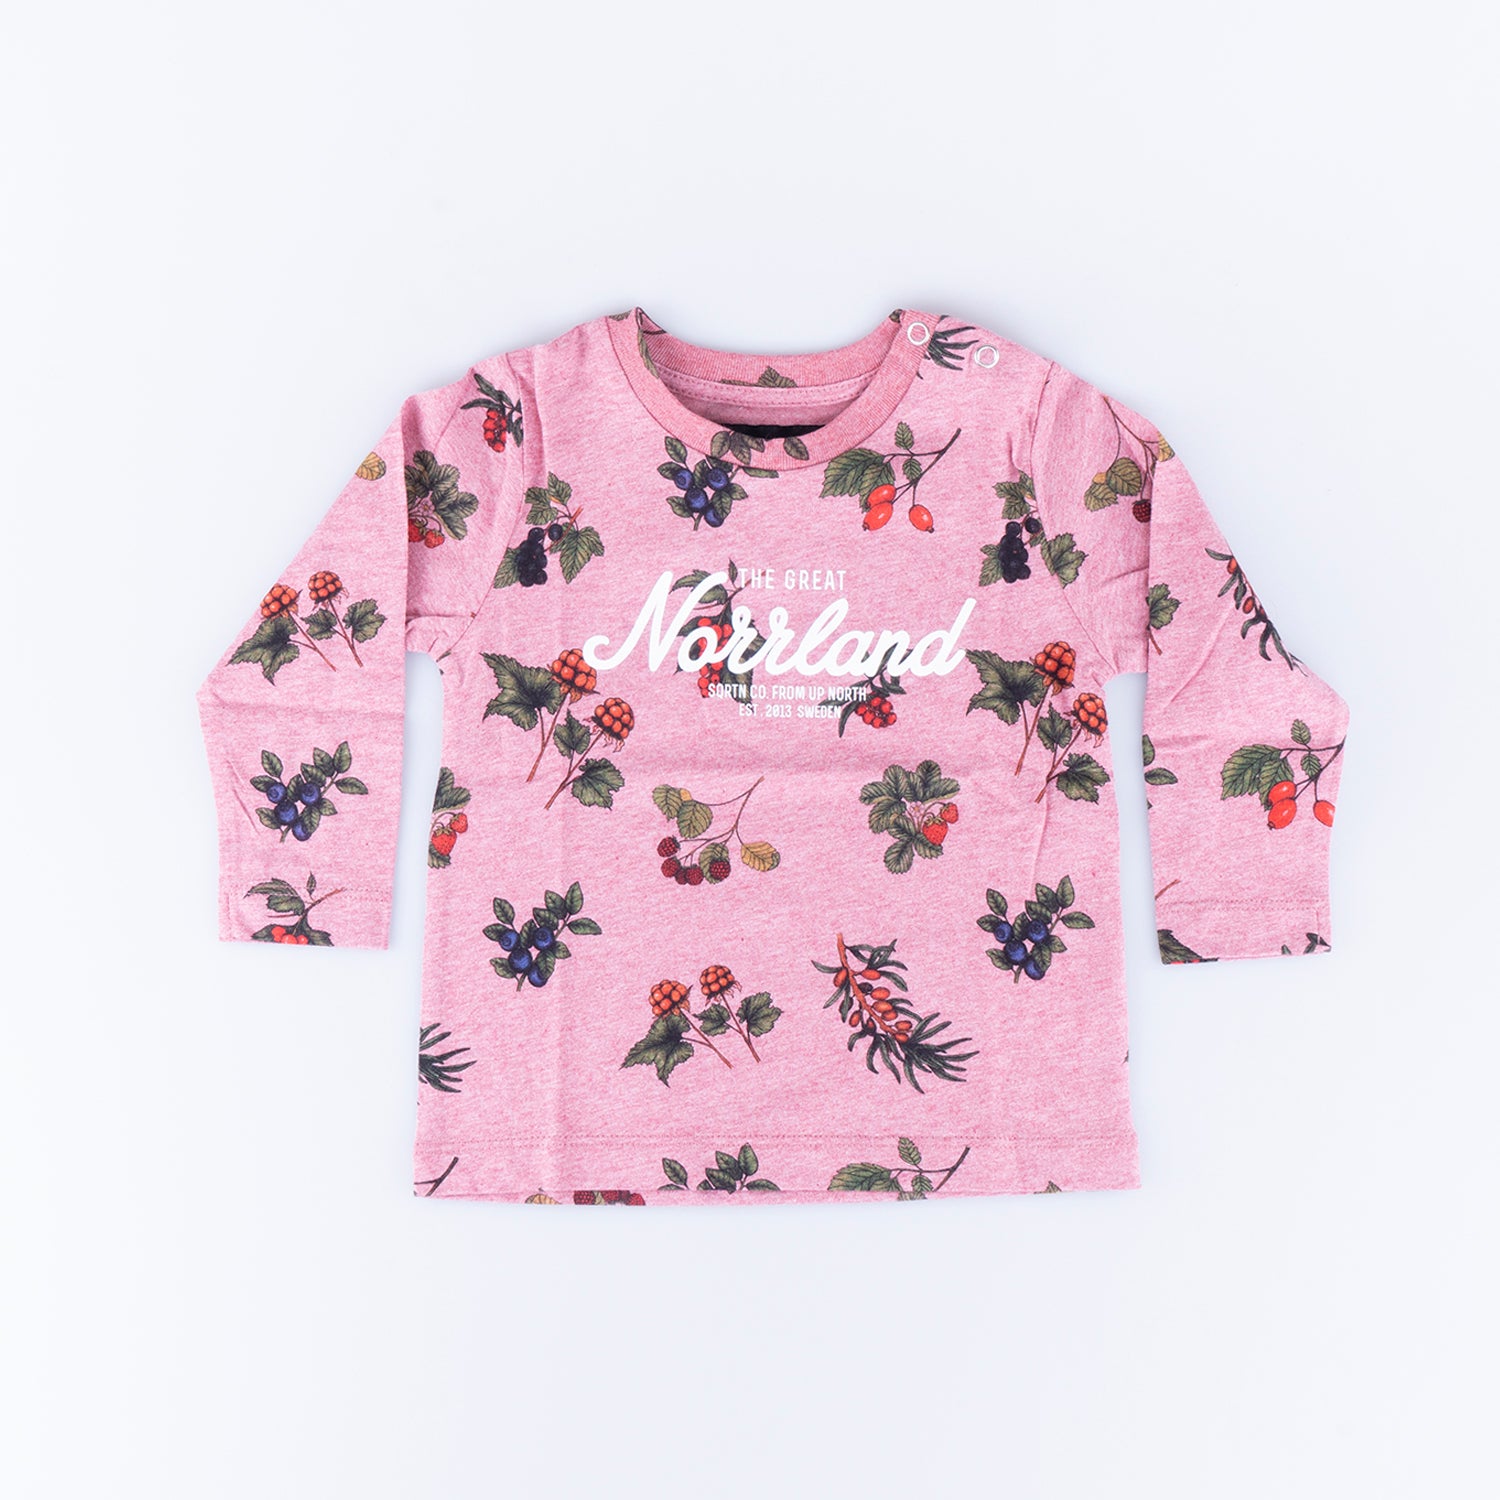 GREAT NORRLAND LONGSLEEVE - BERRY PINK